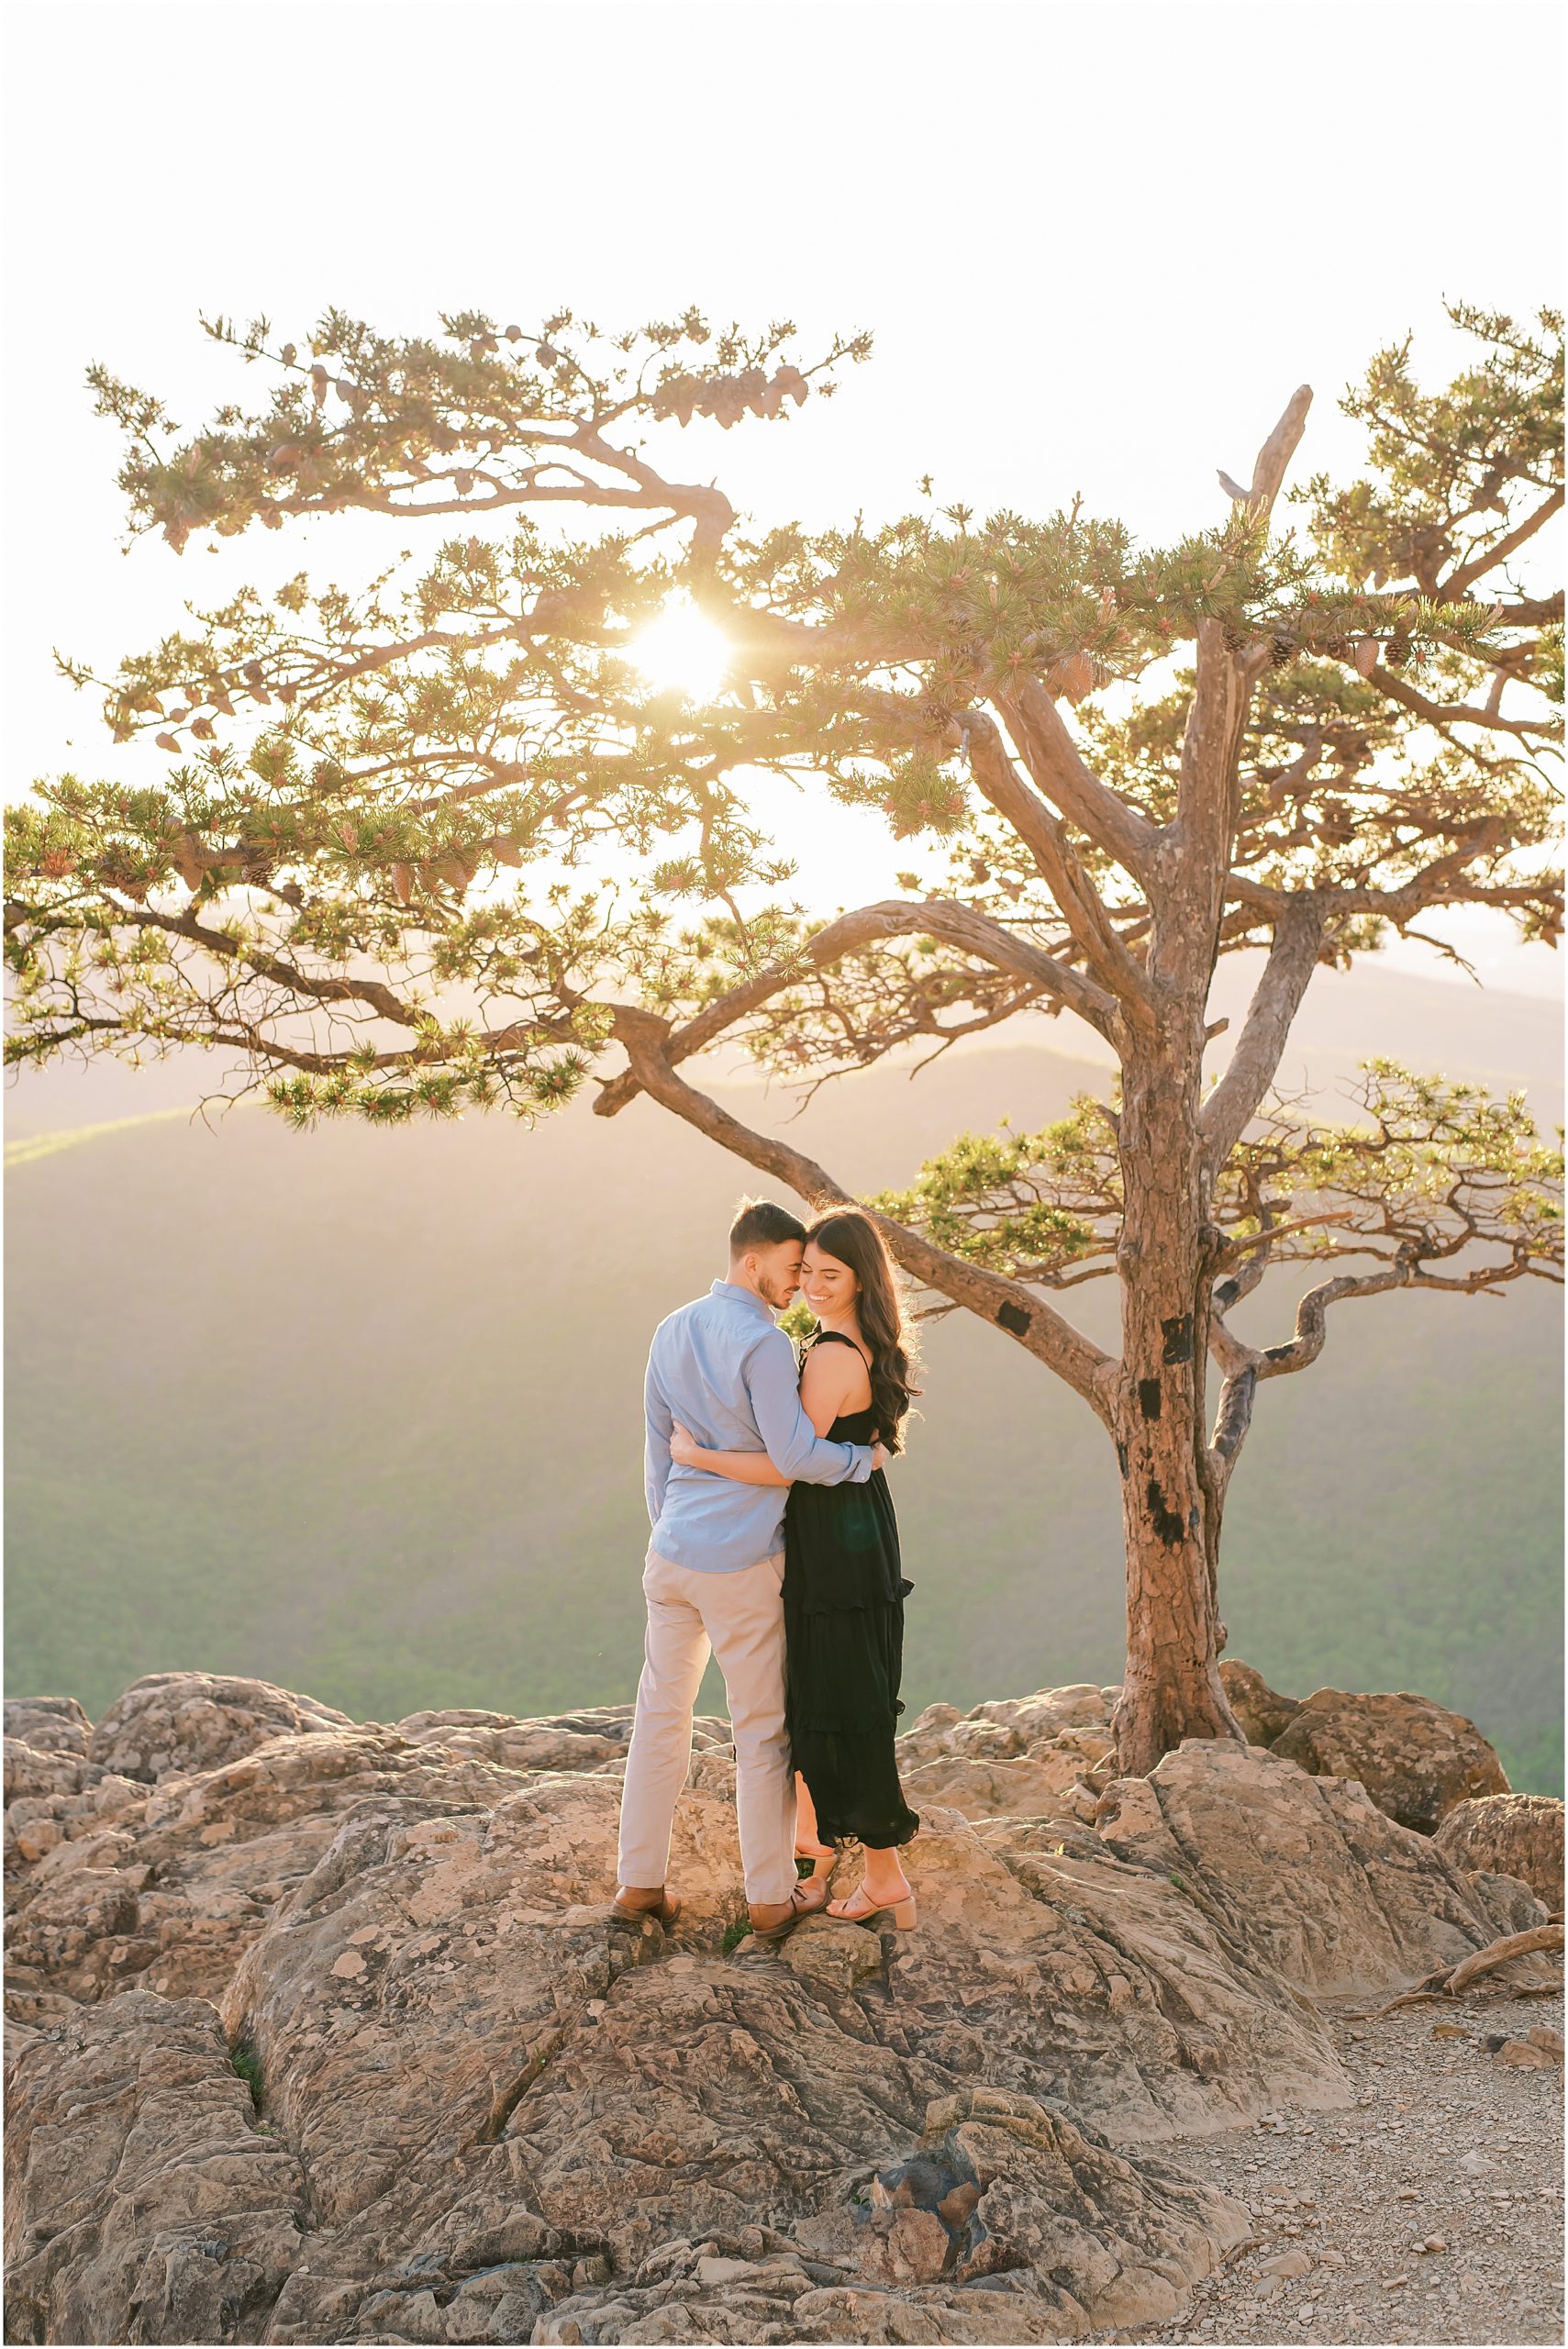 Sunset during Ravens Roost Overlook Engagement Session